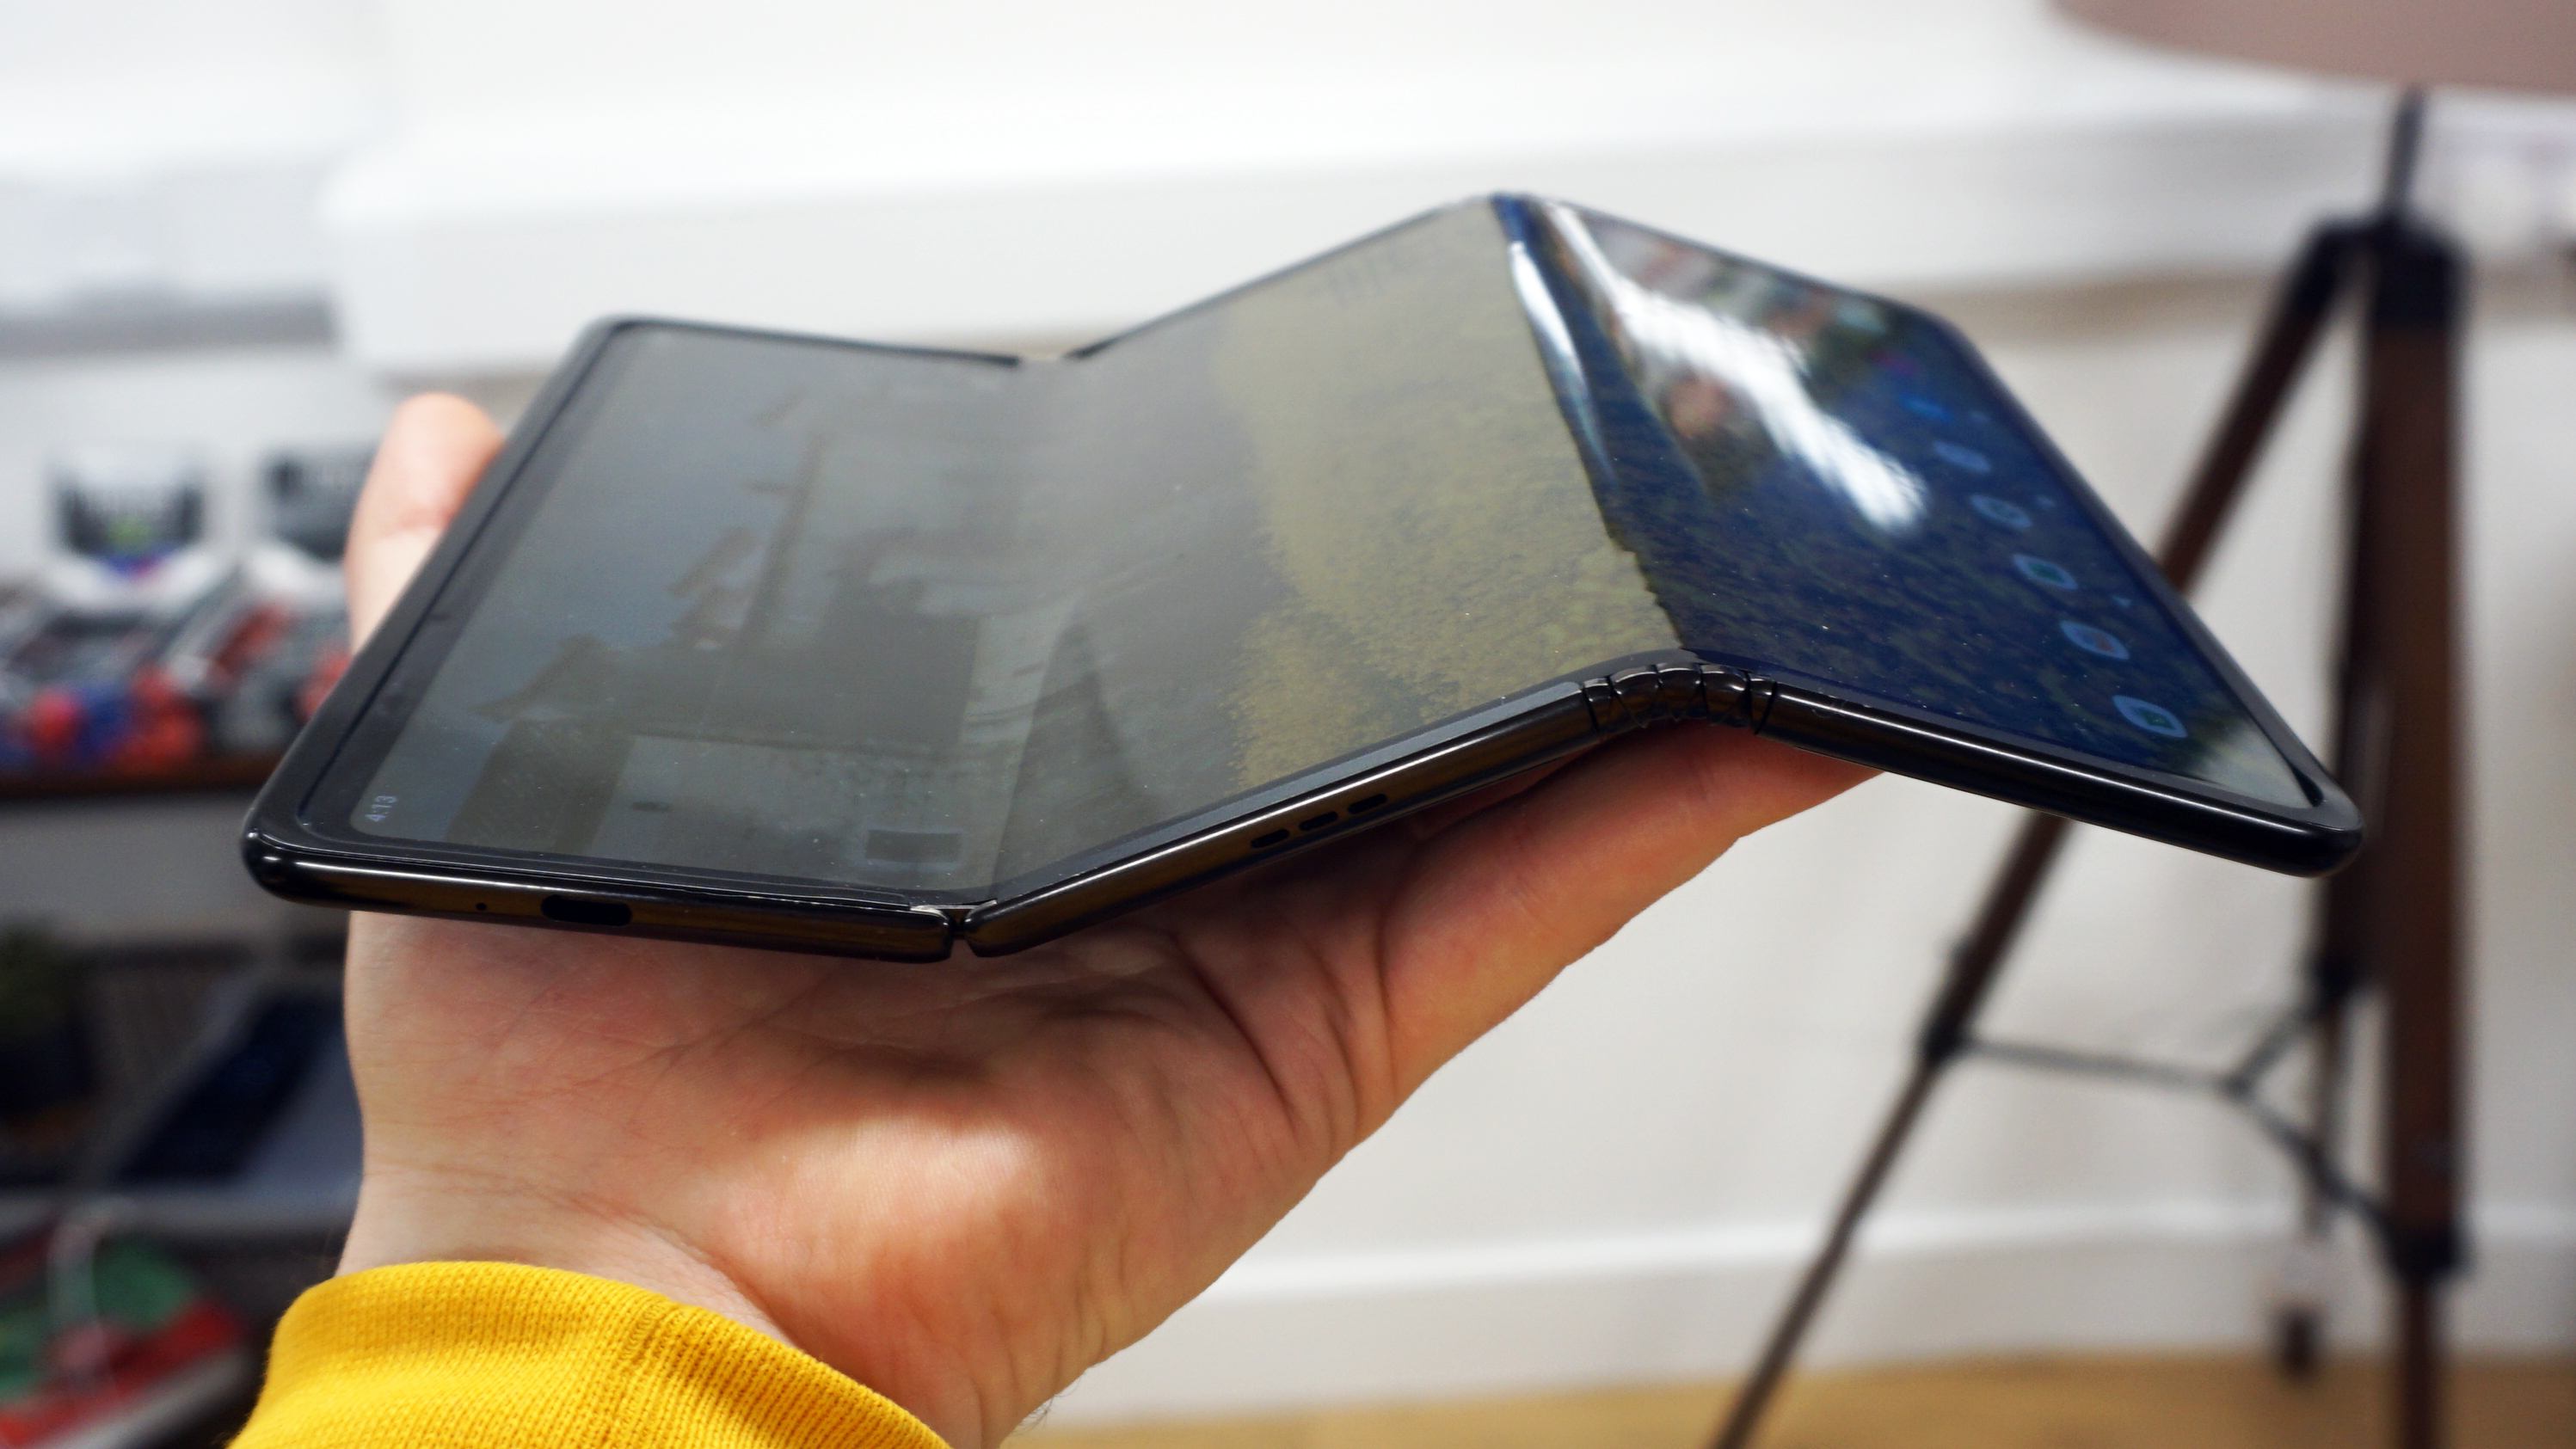 TCL's foldable tablet concept